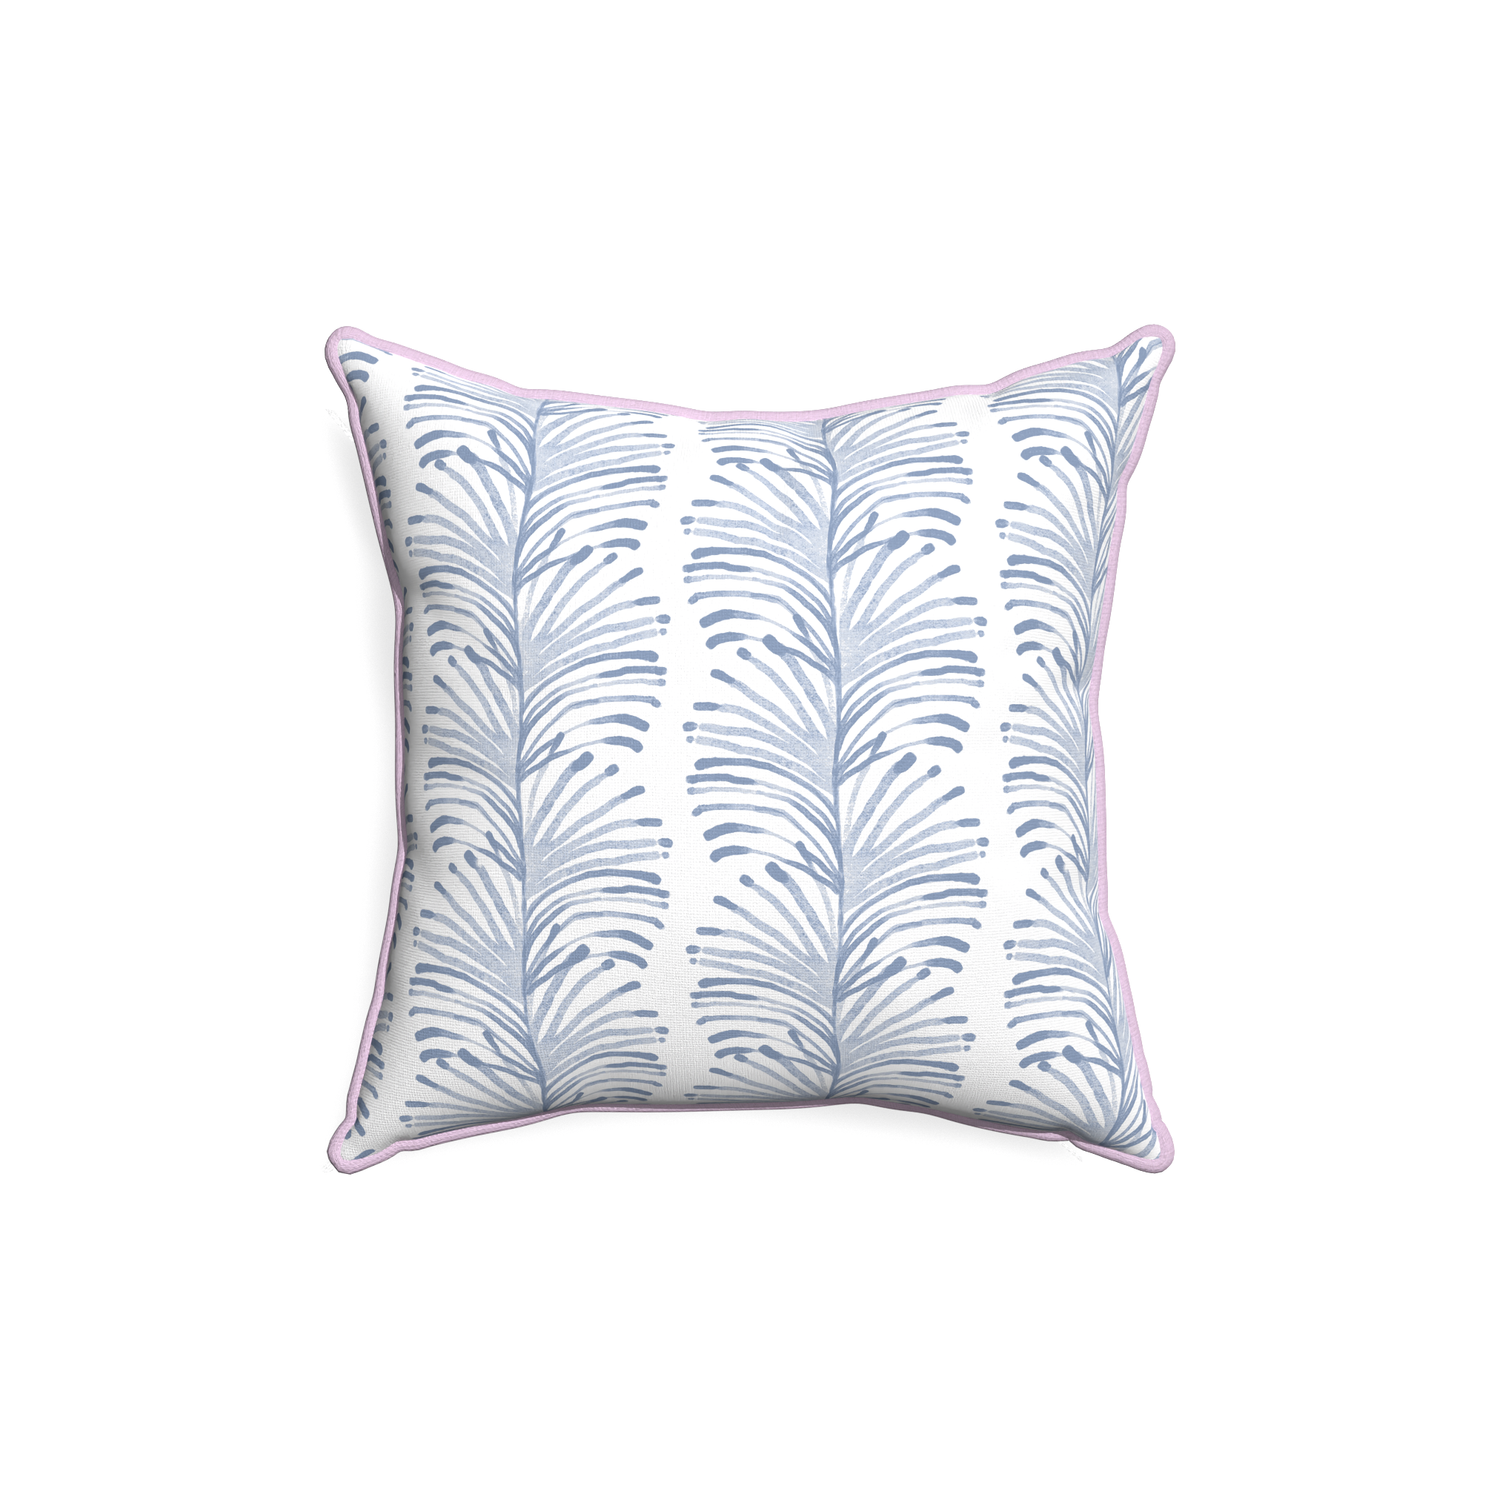 18-square emma sky custom pillow with l piping on white background